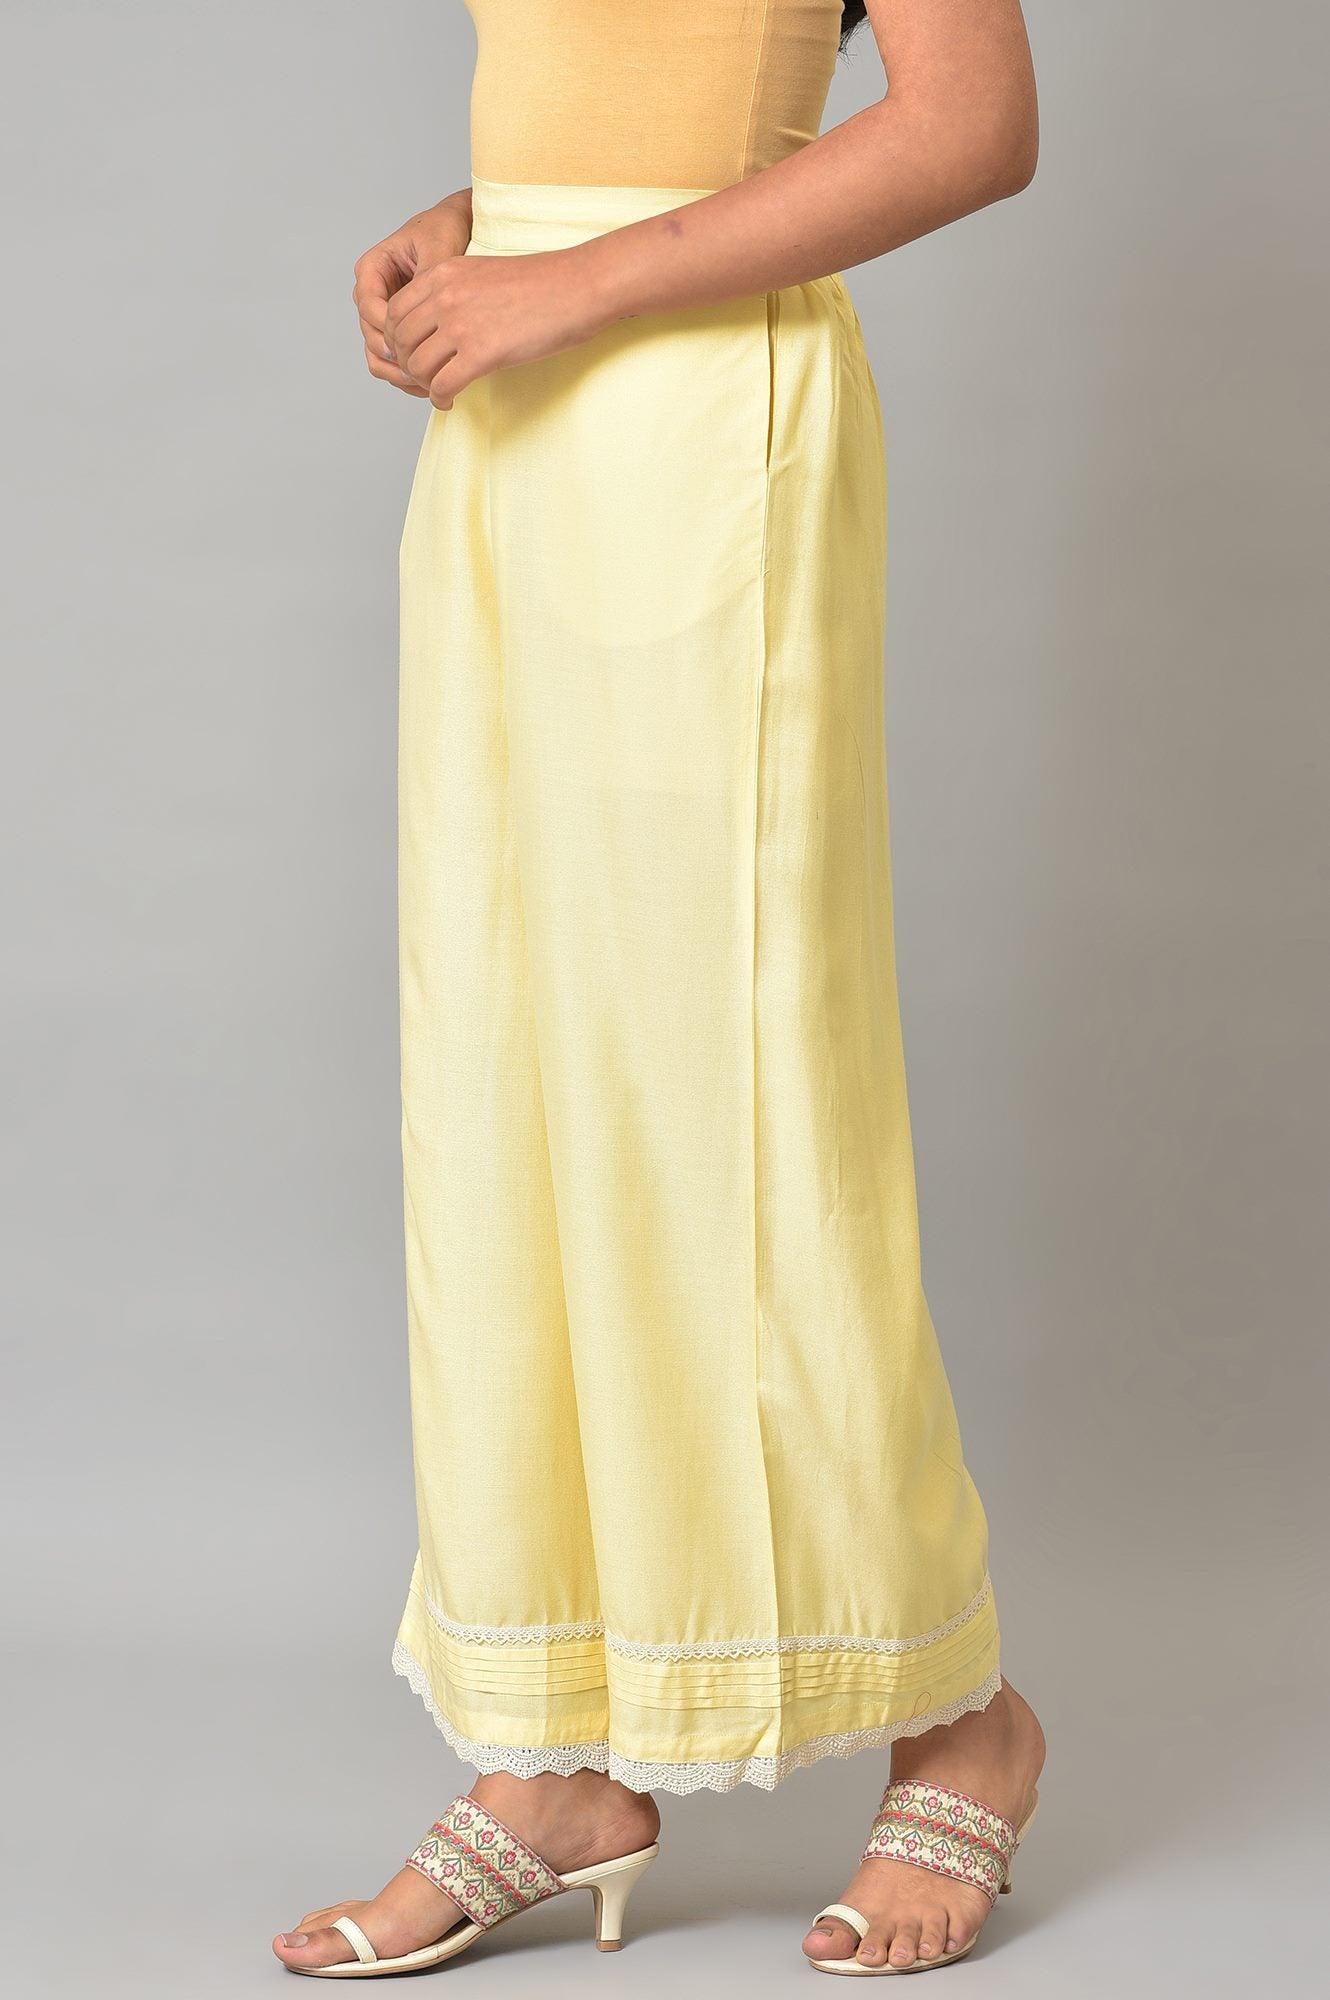 Lemonade Yellow Parallel Pants With Lace Border - wforwoman